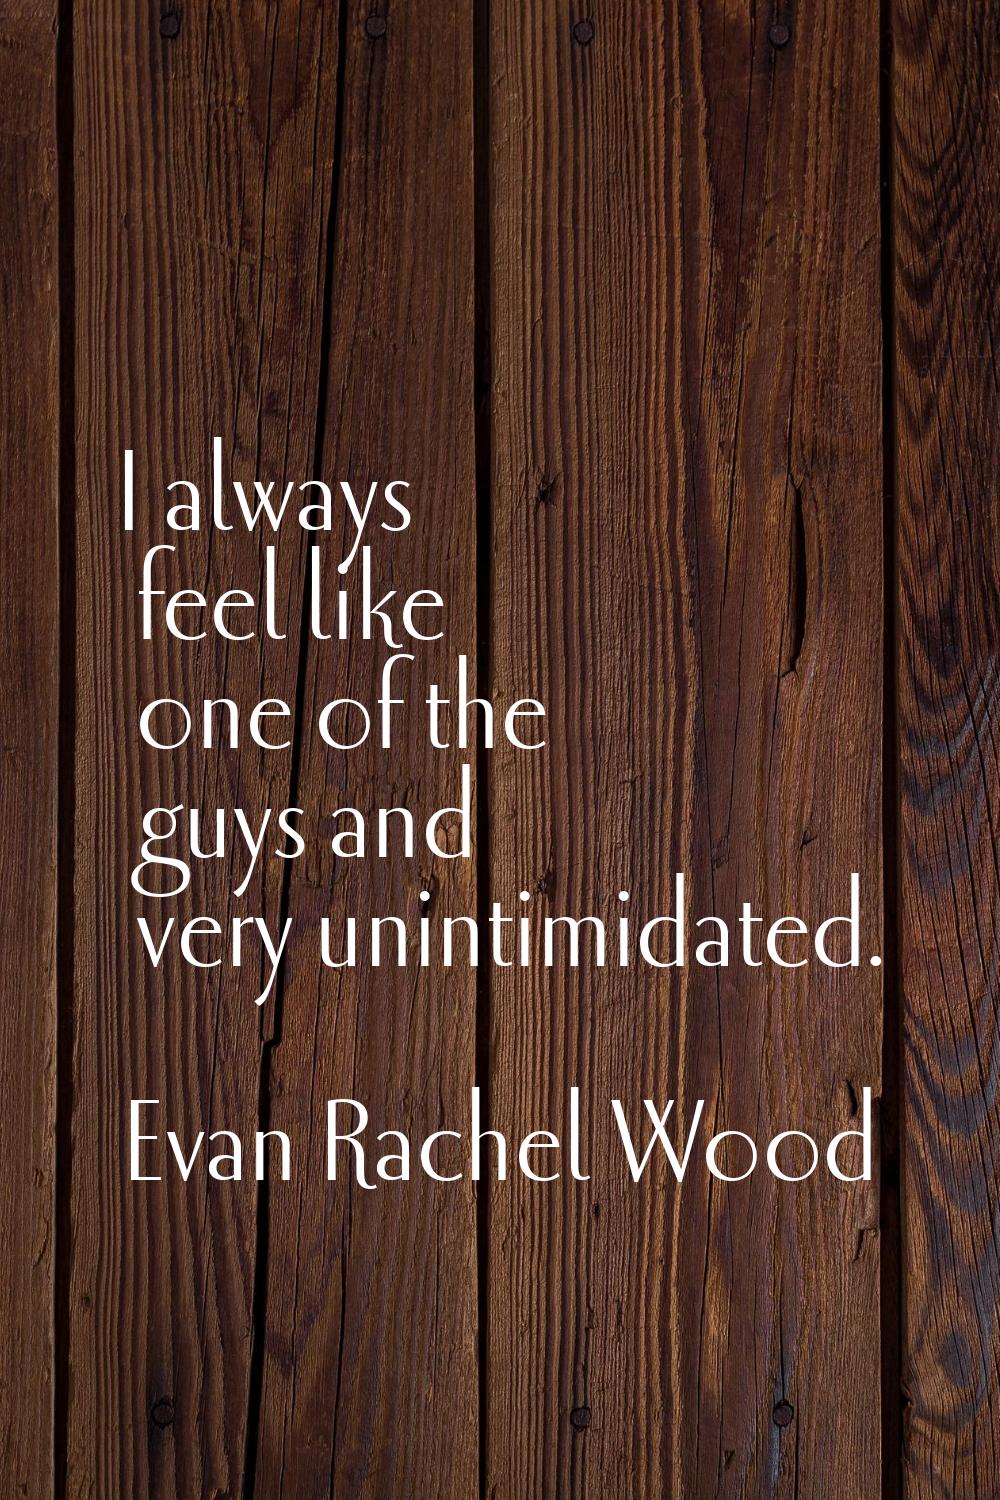 I always feel like one of the guys and very unintimidated.